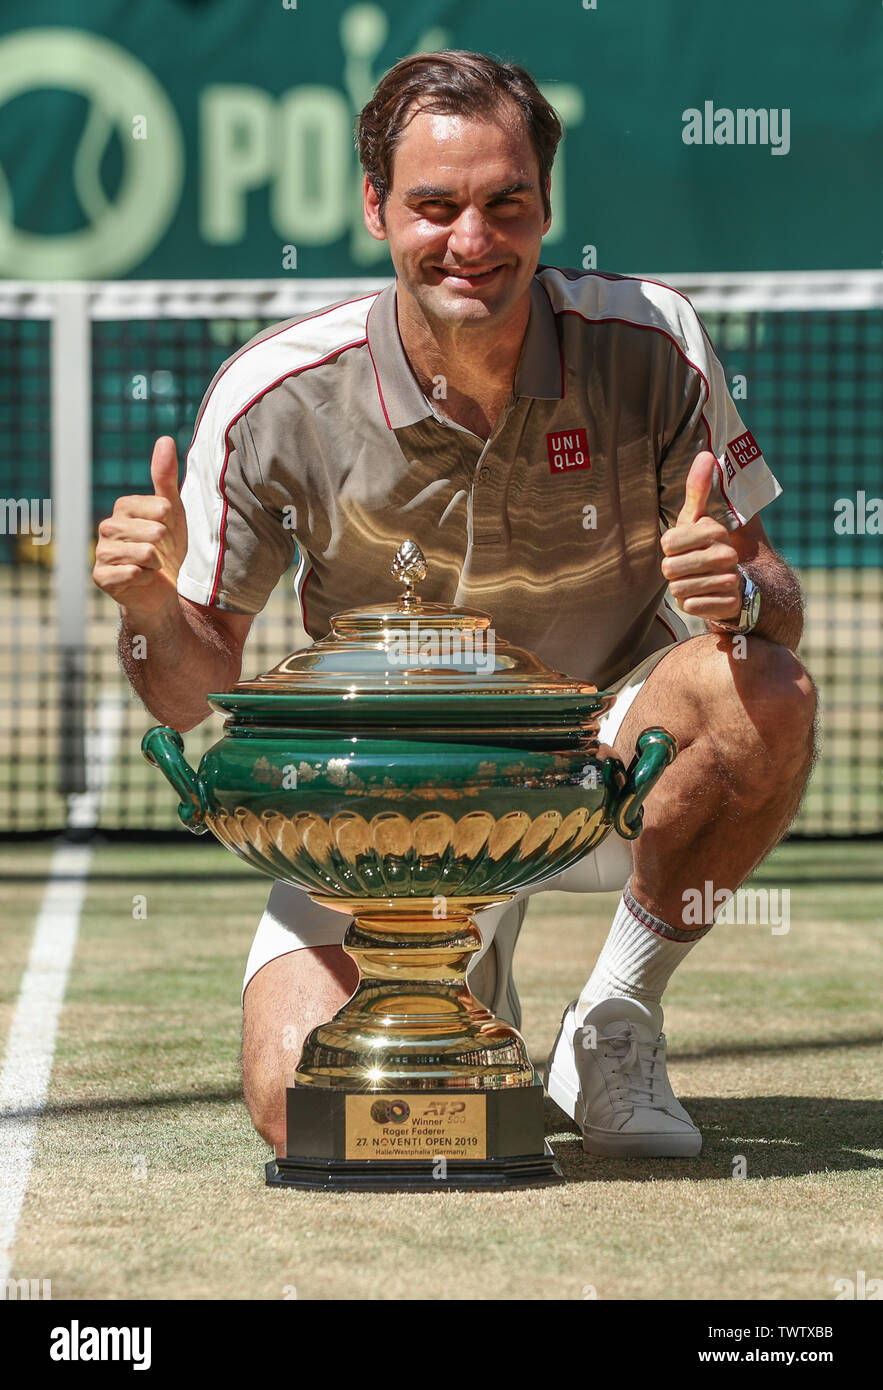 Halle, Germany. 23rd June, 2019. Tennis: ATP-Tour singles, men, final,  Federer (Switzerland) - Goffin (Belgium). The winner Roger Federer kneels  next to the trophy after the award ceremony and keeps his thumbs